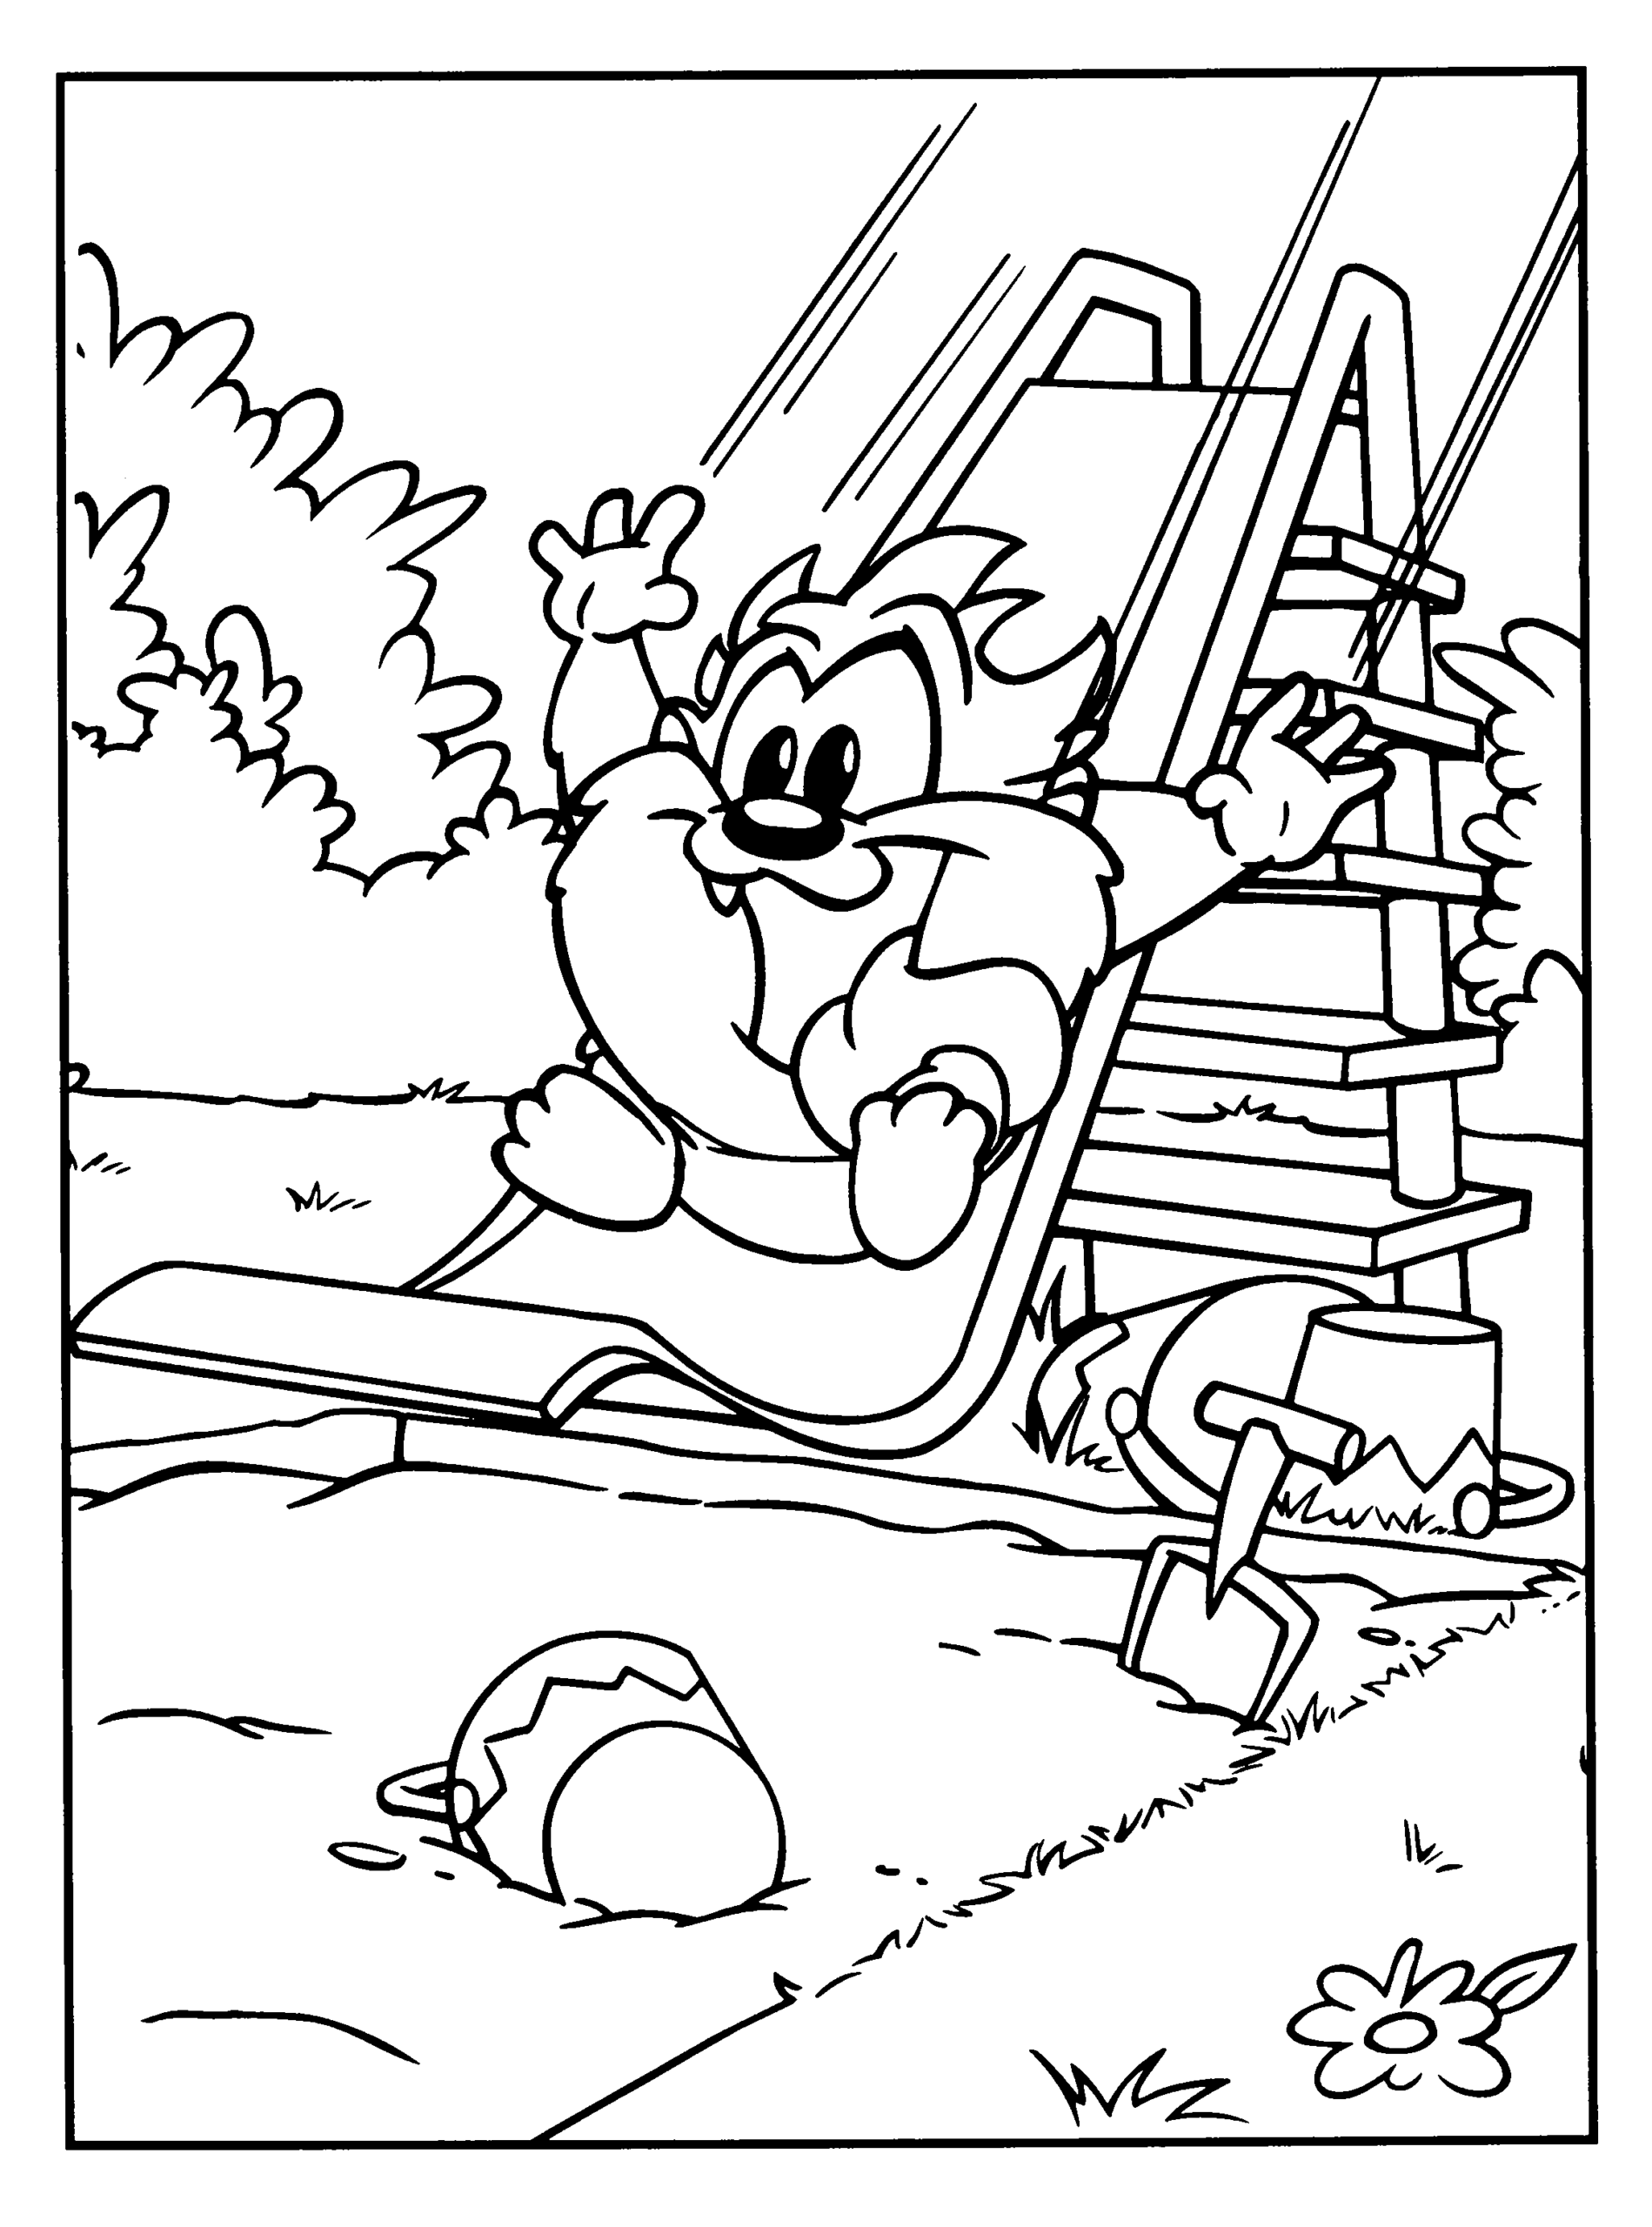 Looney Tunes Coloring Pages TV Film looney tunes 6 Printable 2020 04595 Coloring4free